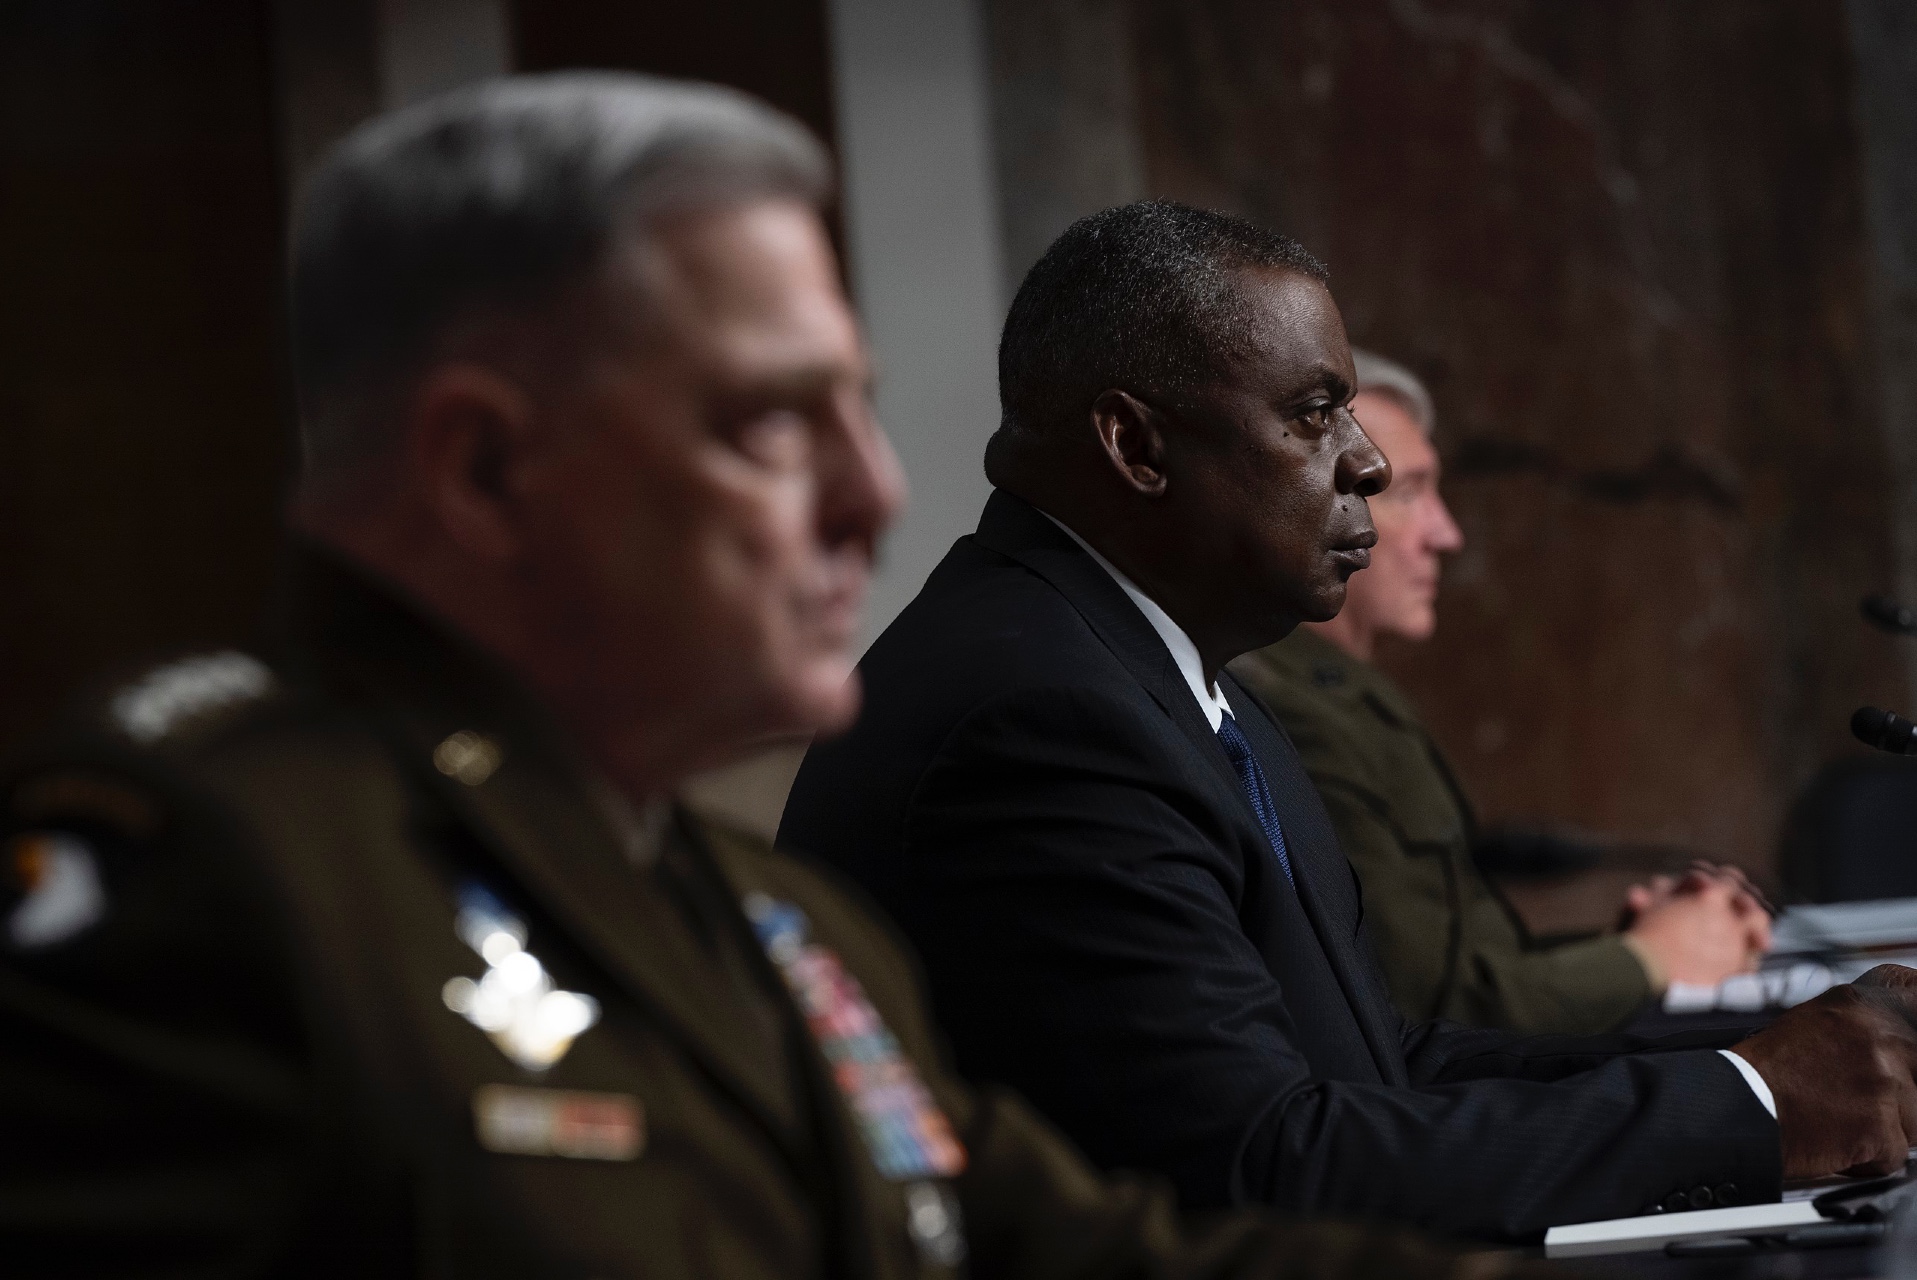 Secretary of Defense Lloyd J. Austin III, Gen. Mark Milley, chairman of the Joint Chiefs of Staff and Gen. Kenneth McKenzie, commander, United States Central Command appear before the Senate Armed Services Committee